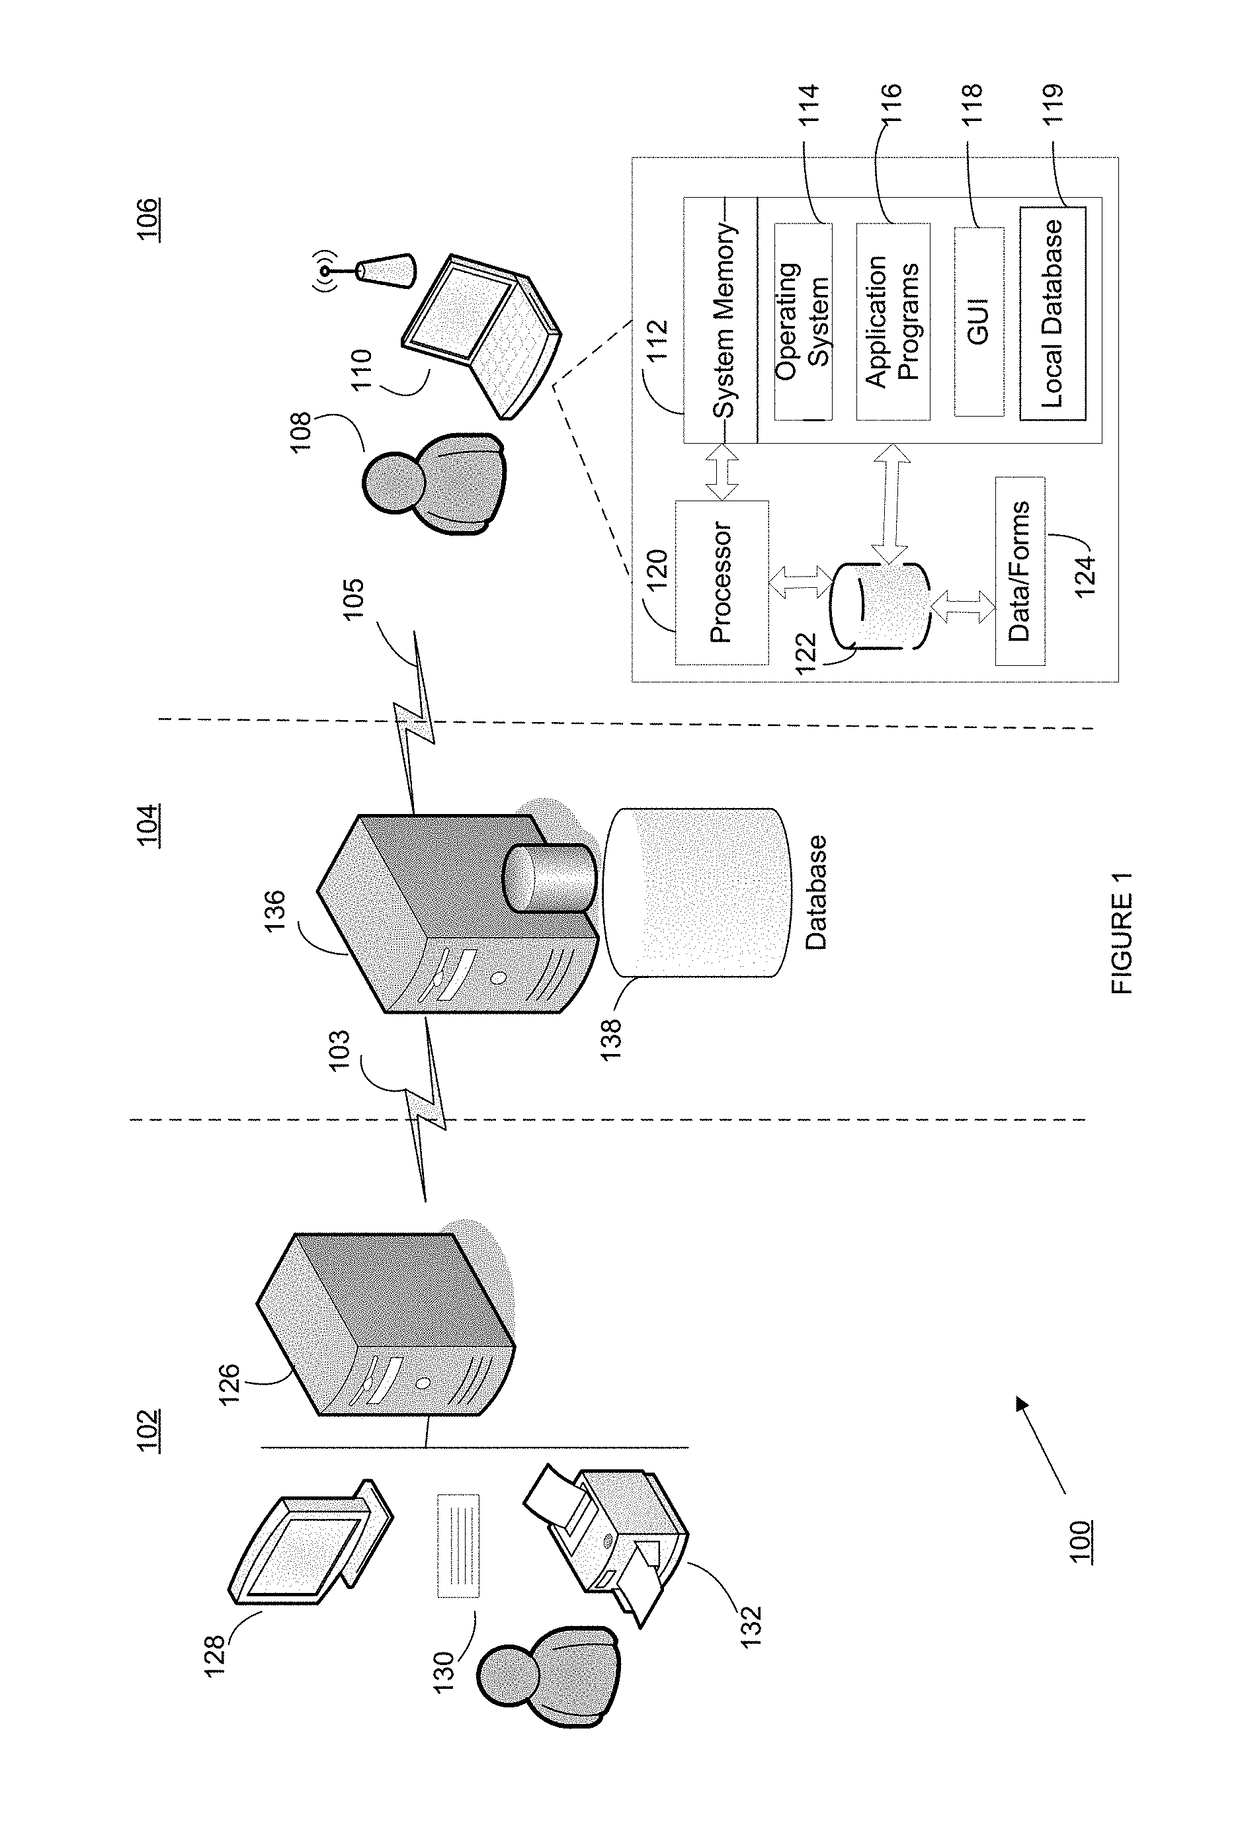 Method and system for implementing workflows and managing staff and engagements